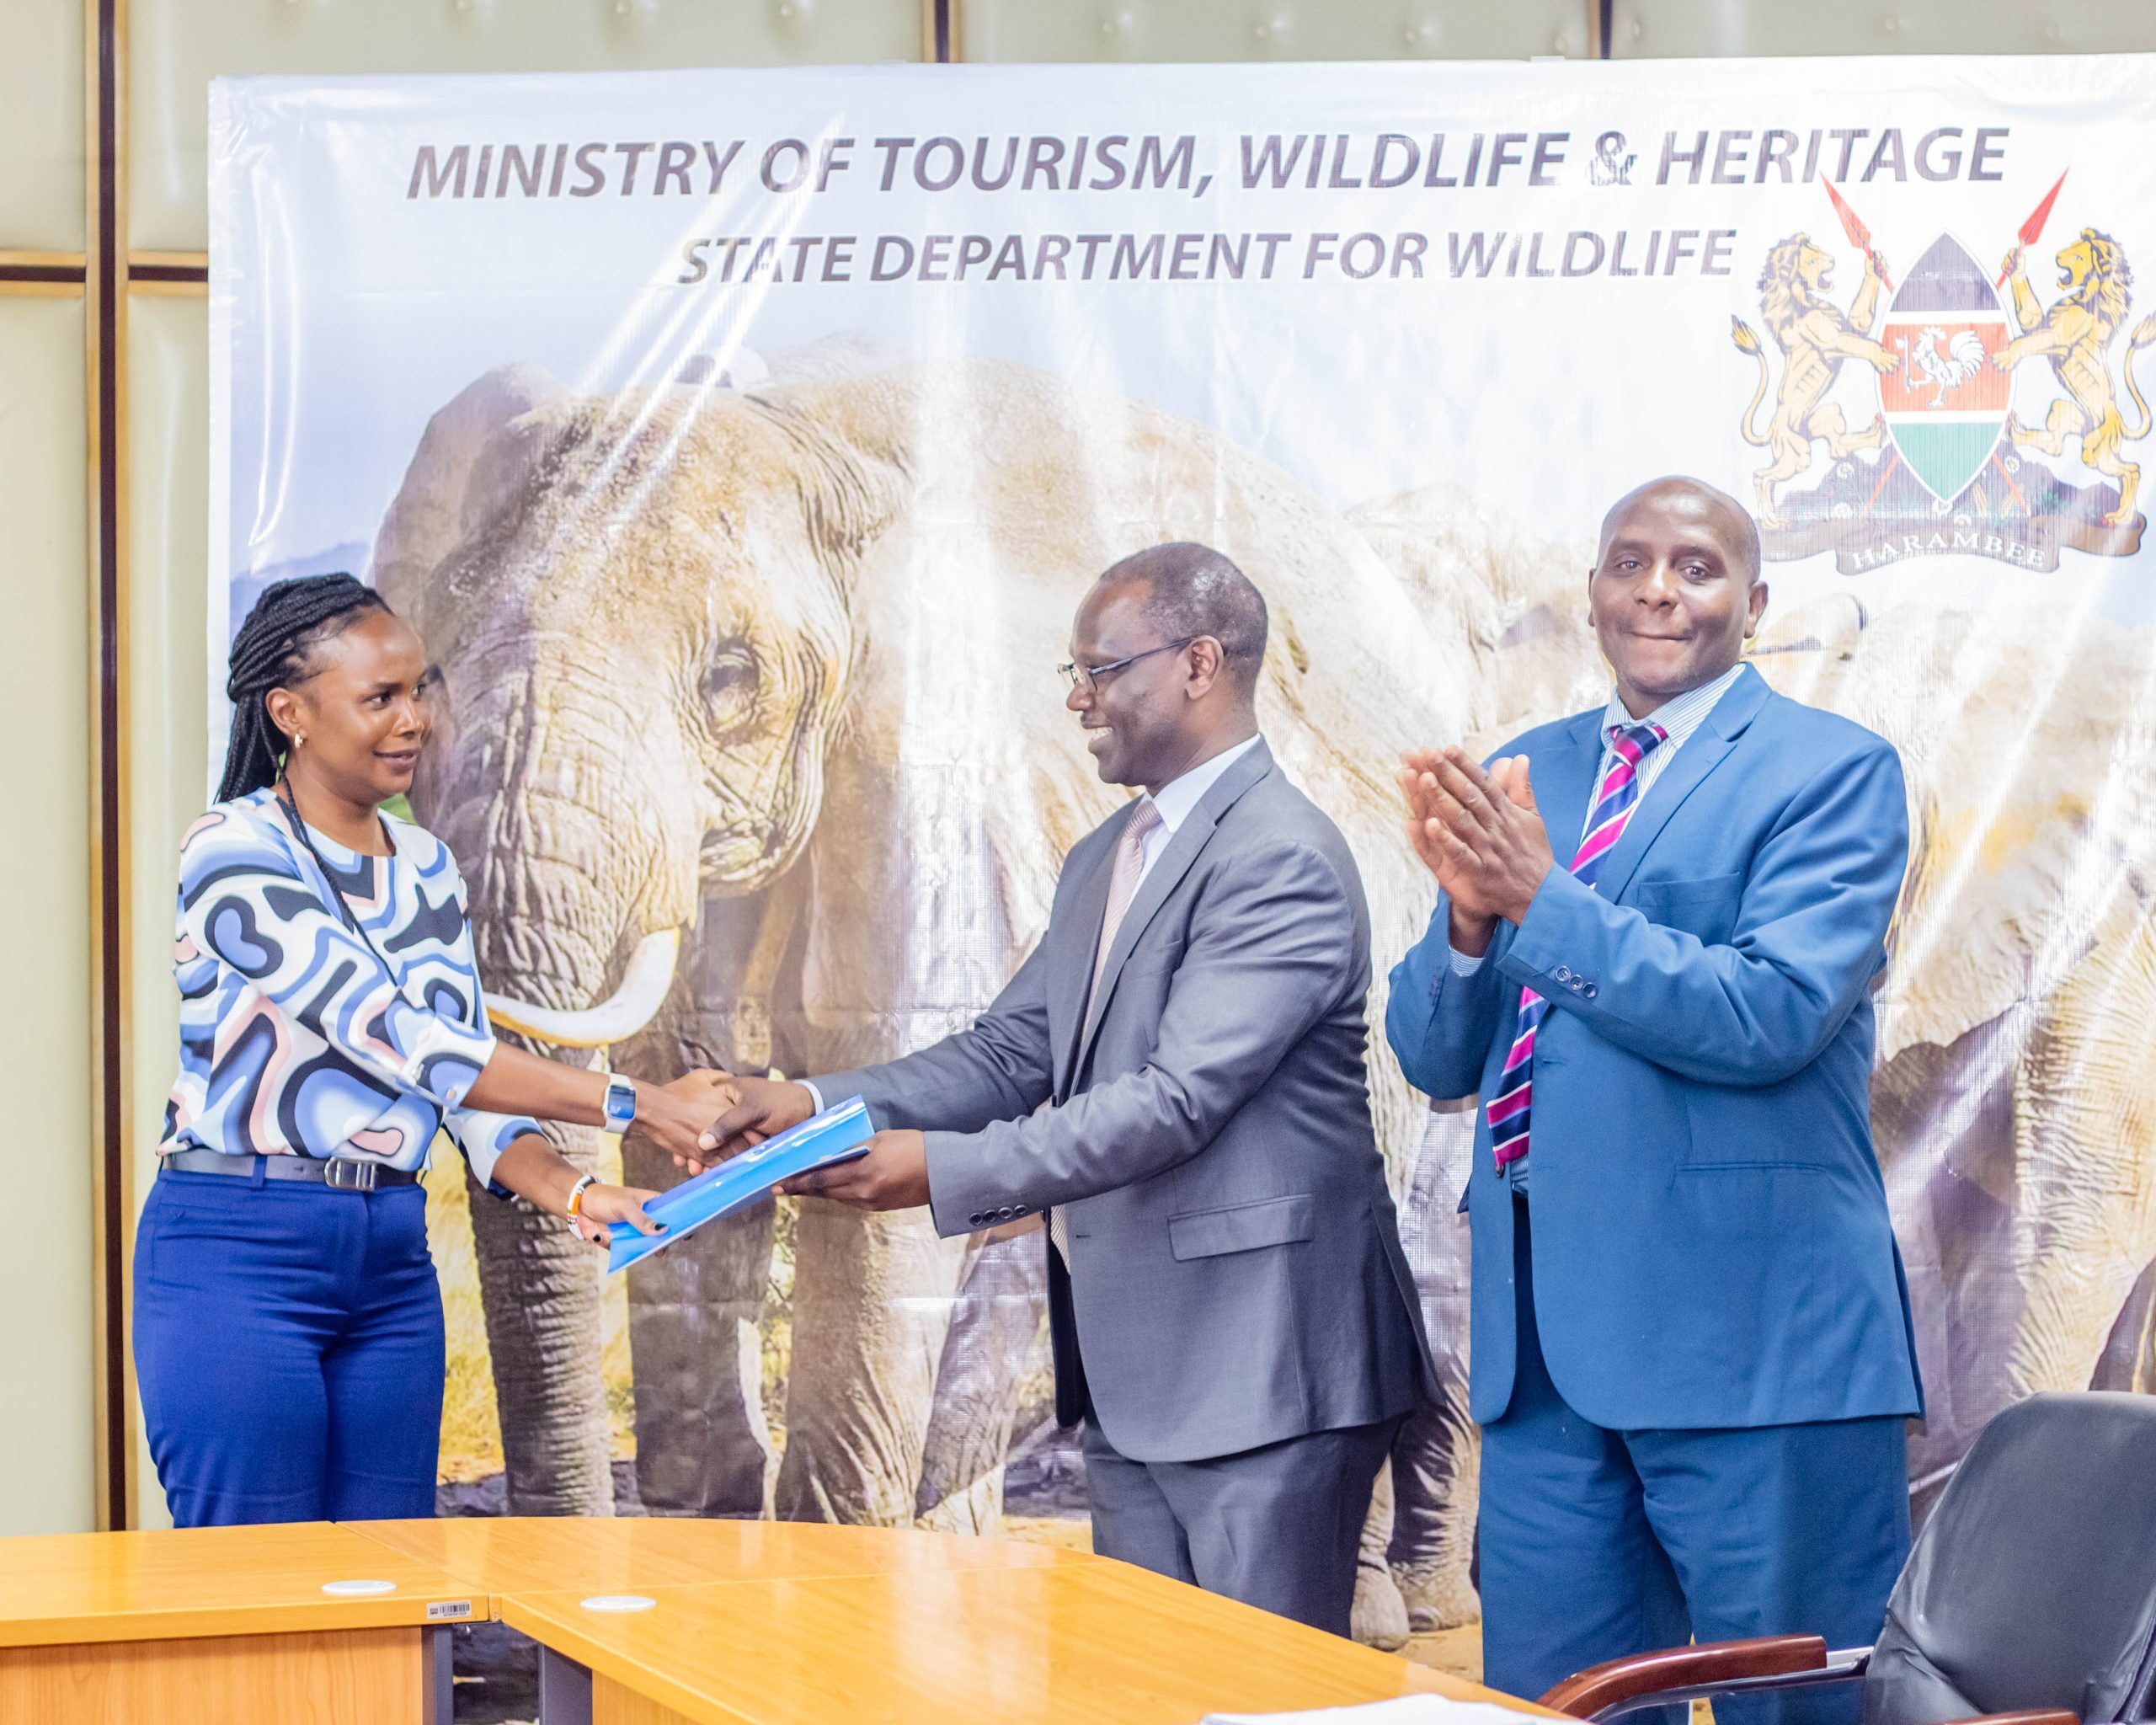 Principal Secretary for Wildlife Silvia Museiya hands over a signed copy of the Performance Contract Document to the Director of Planning, Mr Charles Ombuki.